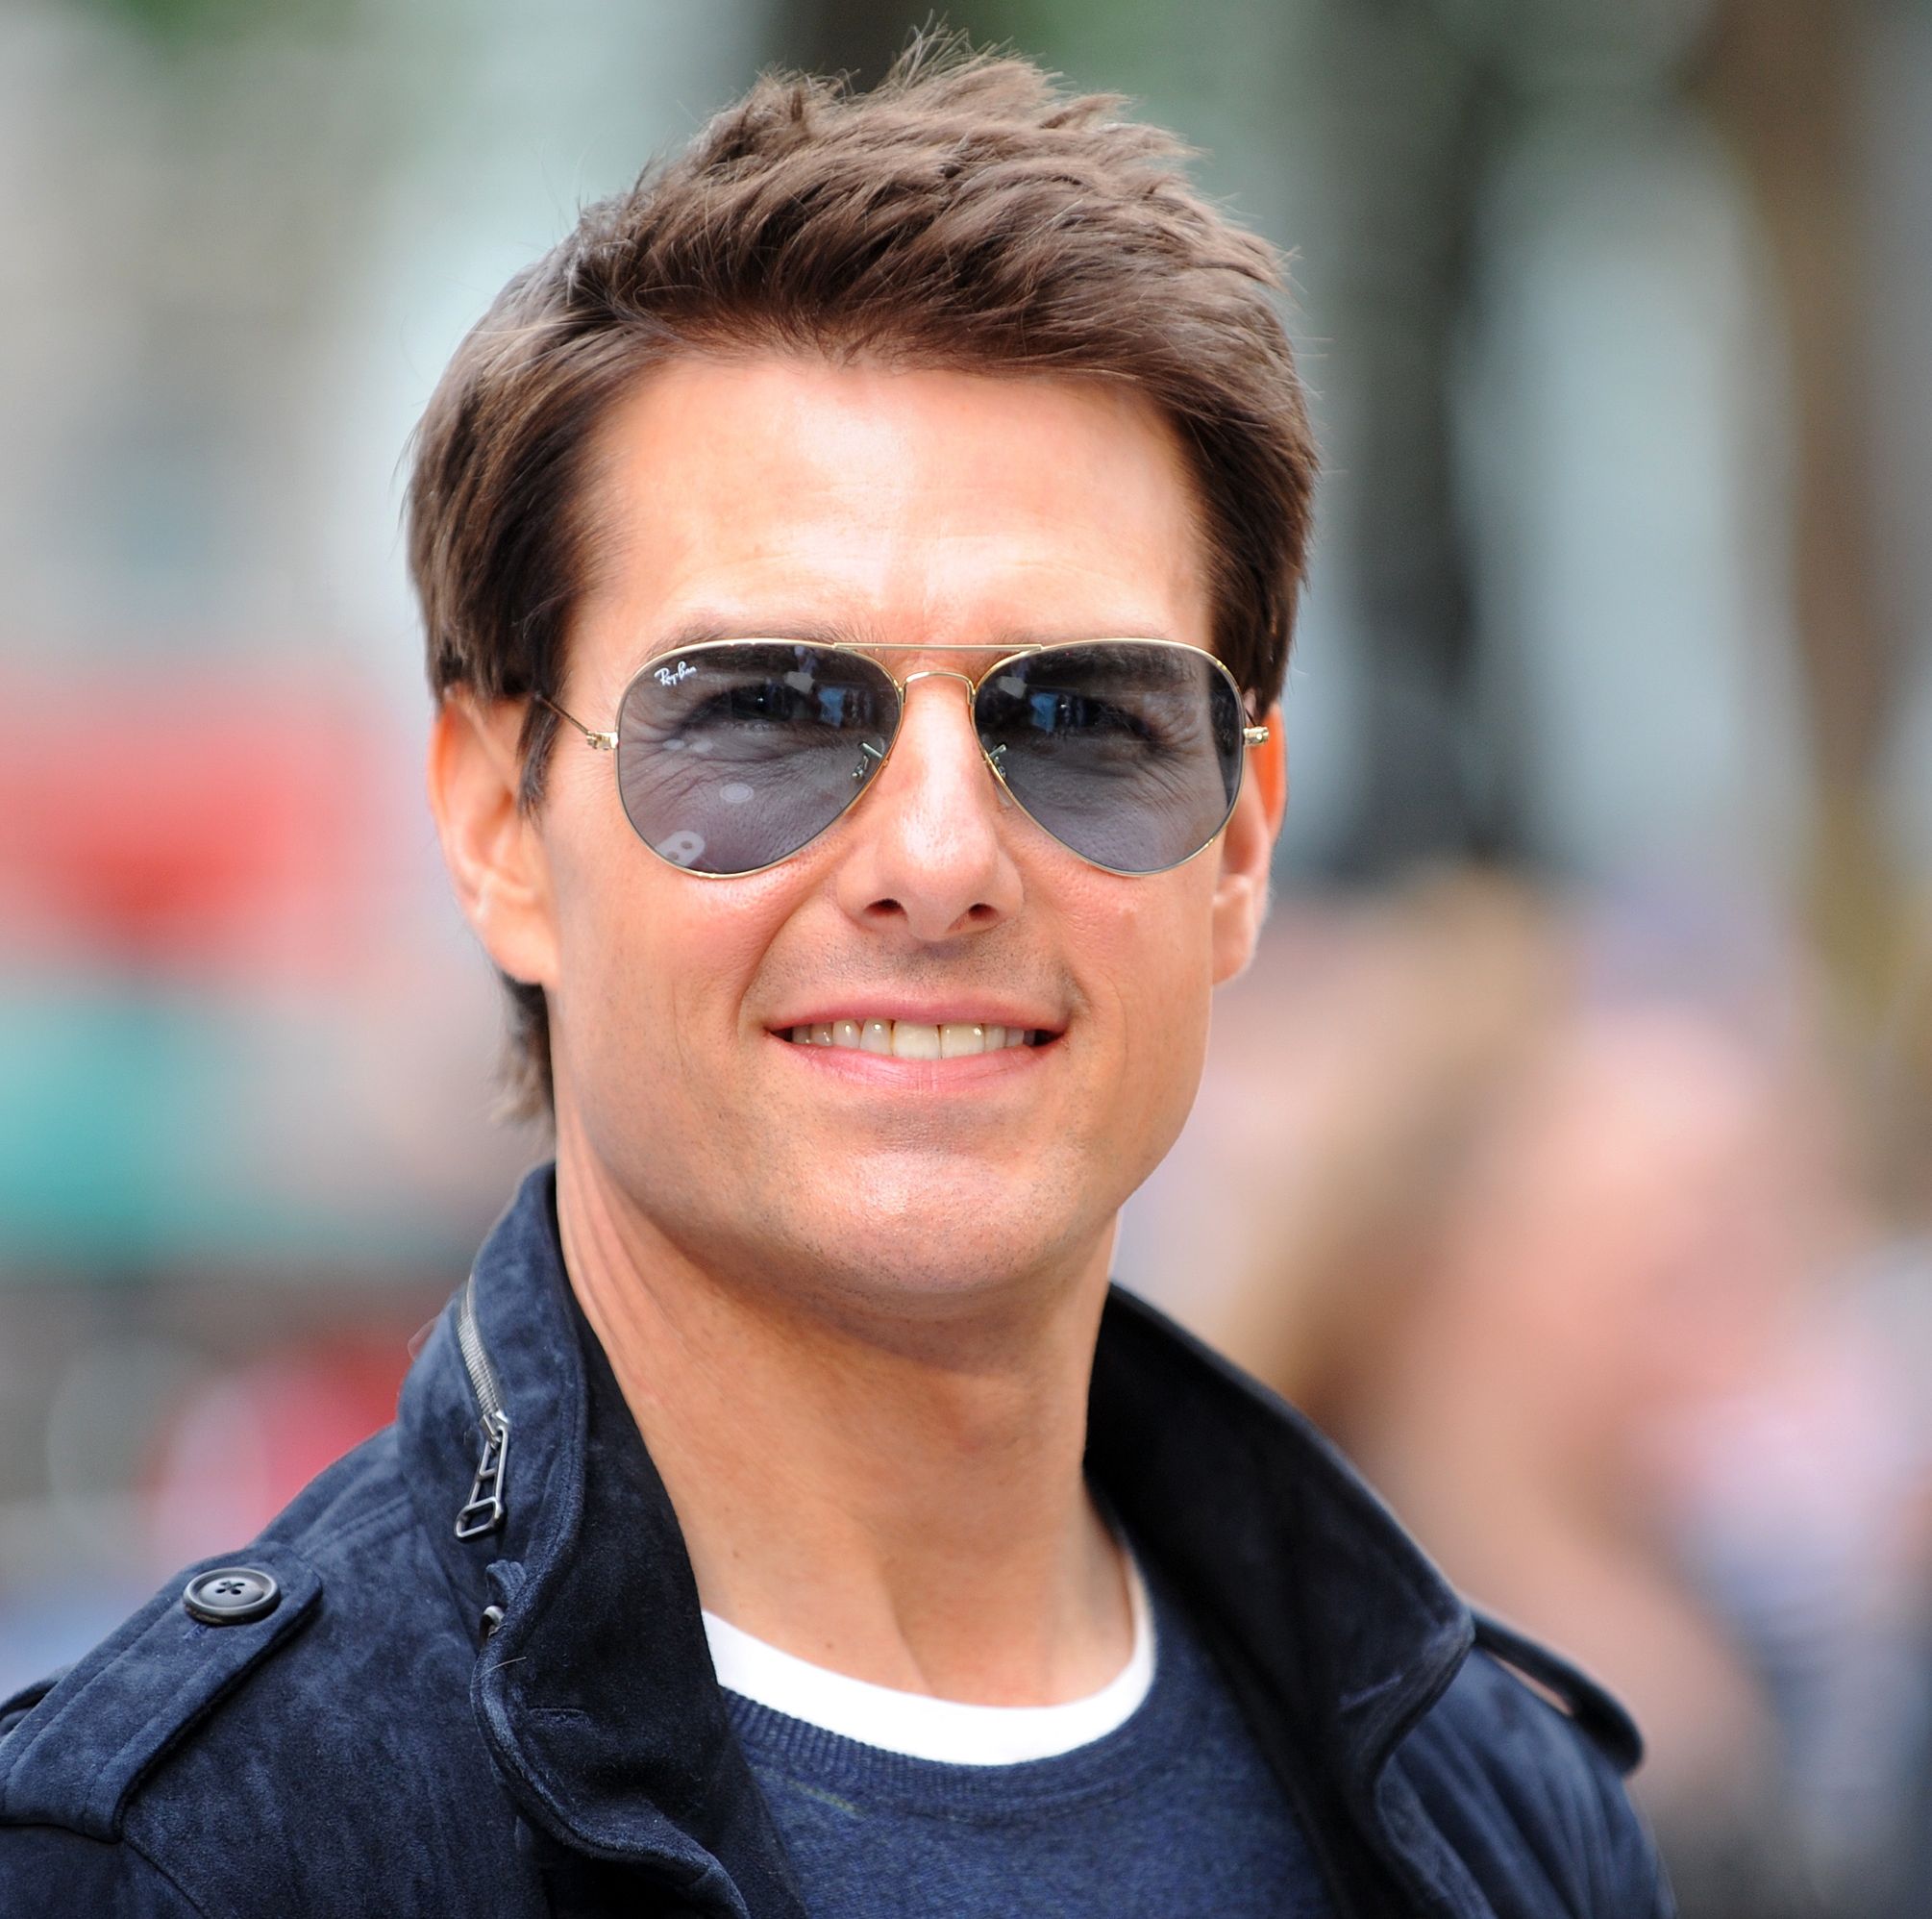 Tom Cruise's Best Actor Oscars Snub Is Getting a Ton of Mixed Responses on Twitter